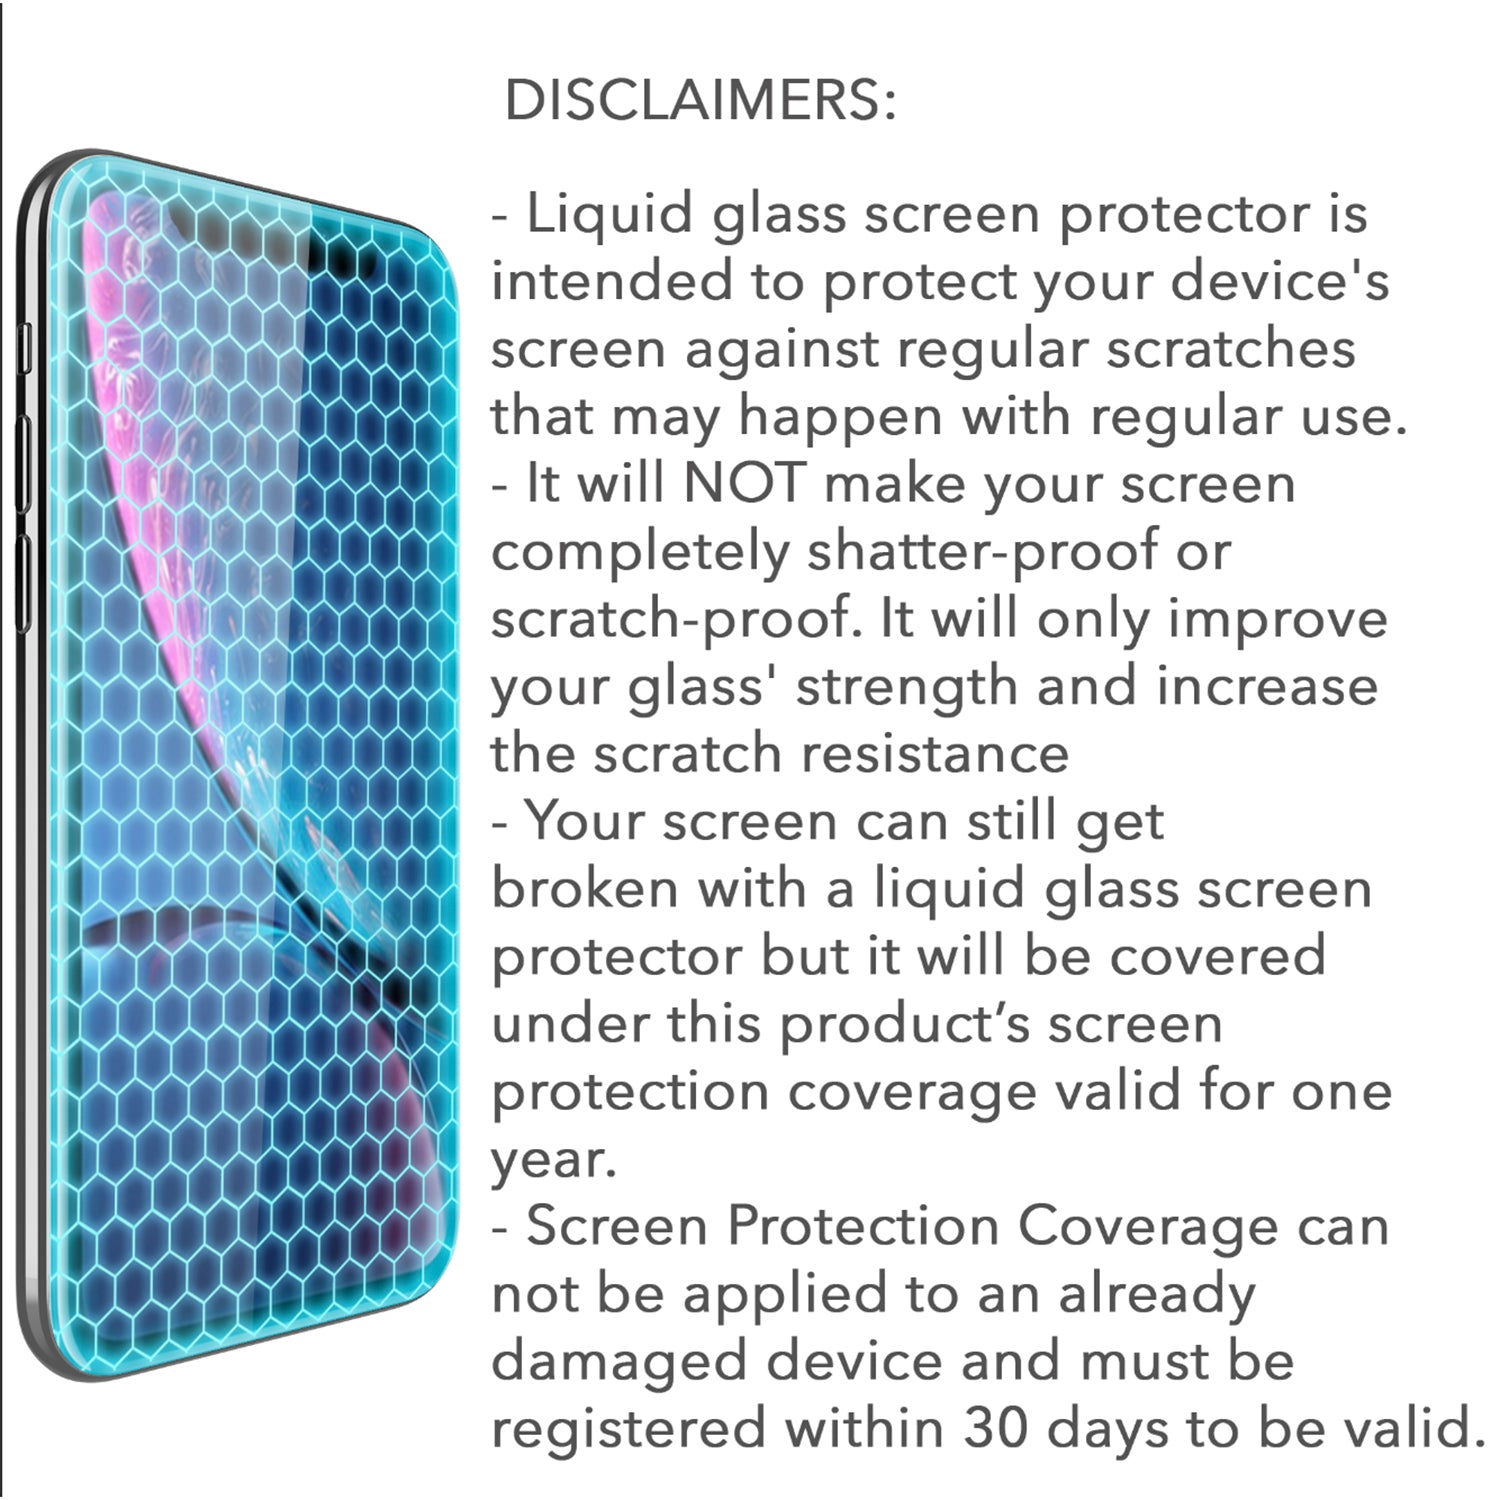 Liquid Glass Screen Protector with $350 Screen Protection - Universal